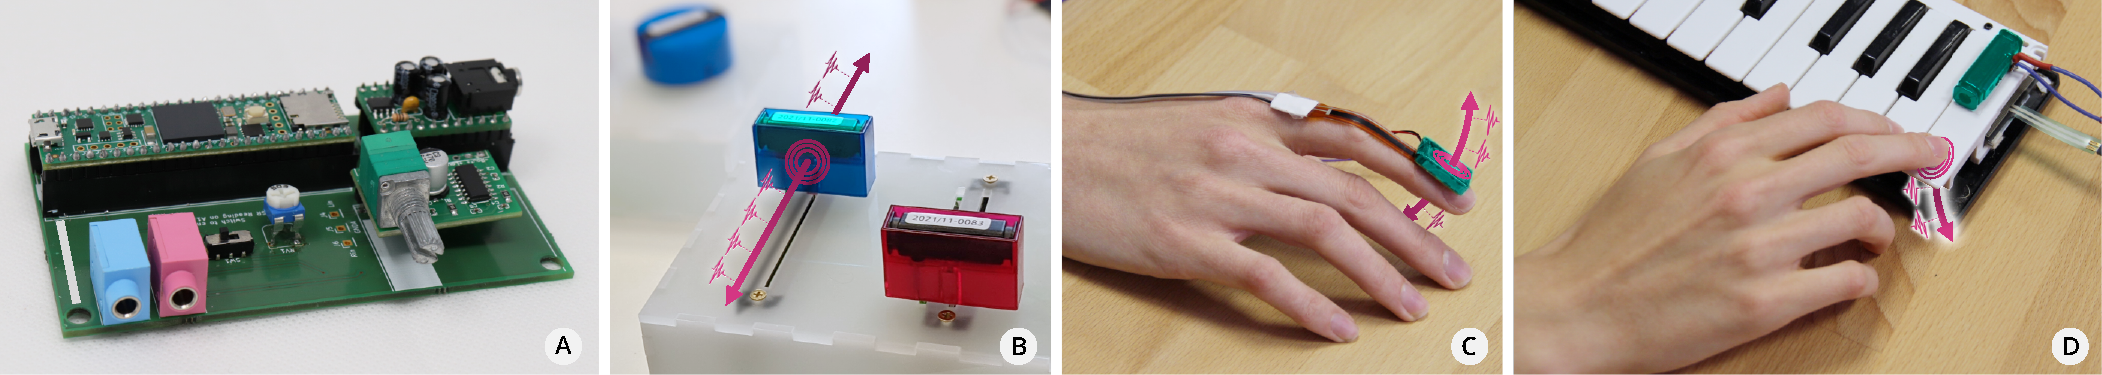 Haptic Servos: Self-Contained Vibrotactile Rendering System for Creating or Augmenting Material Experiences